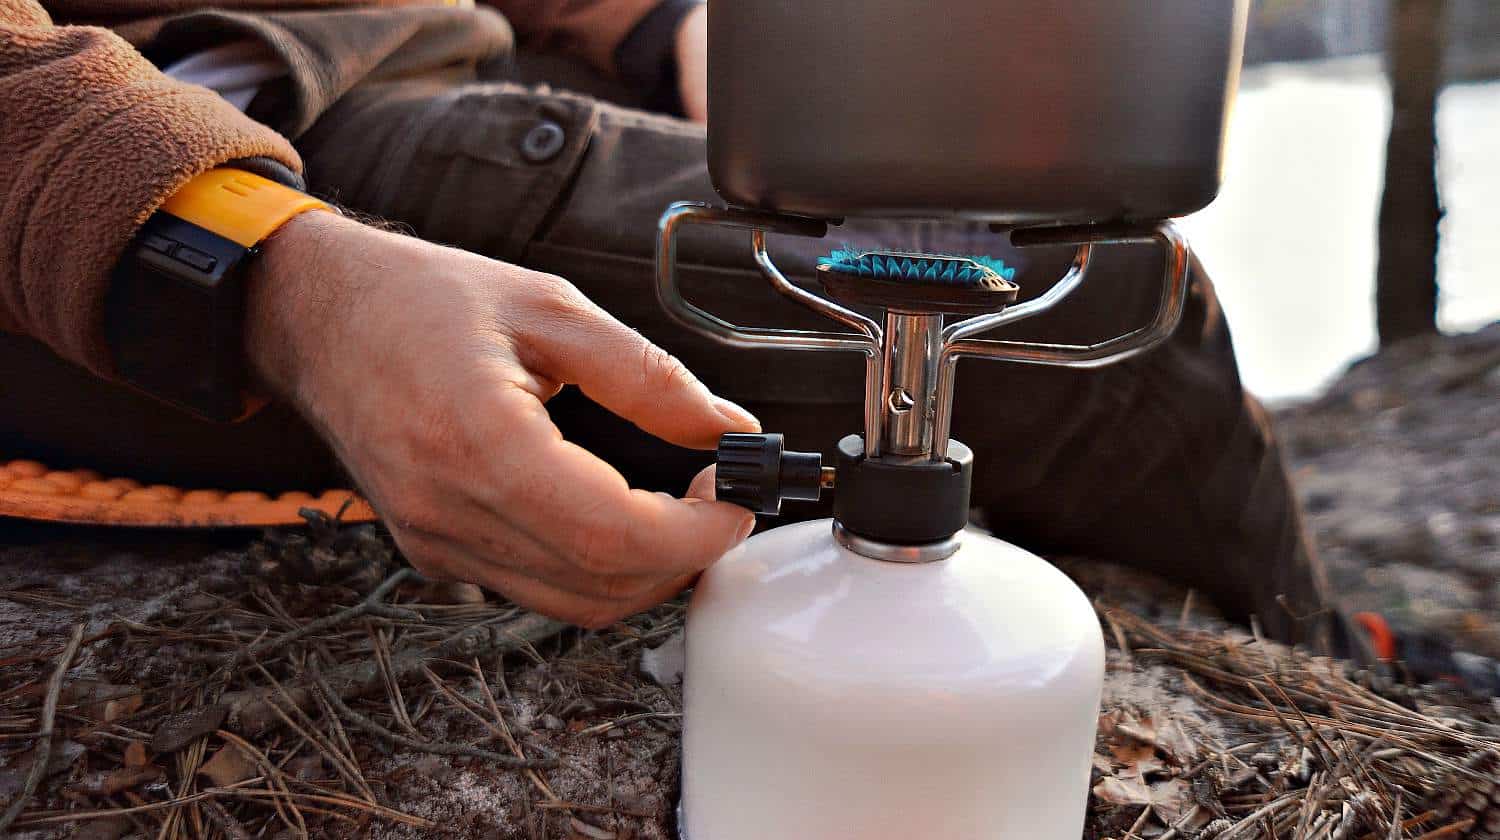 Traveler opening a propane tank for cooking | A Primer On Propane For The Practical Prepper-Part II | Featured